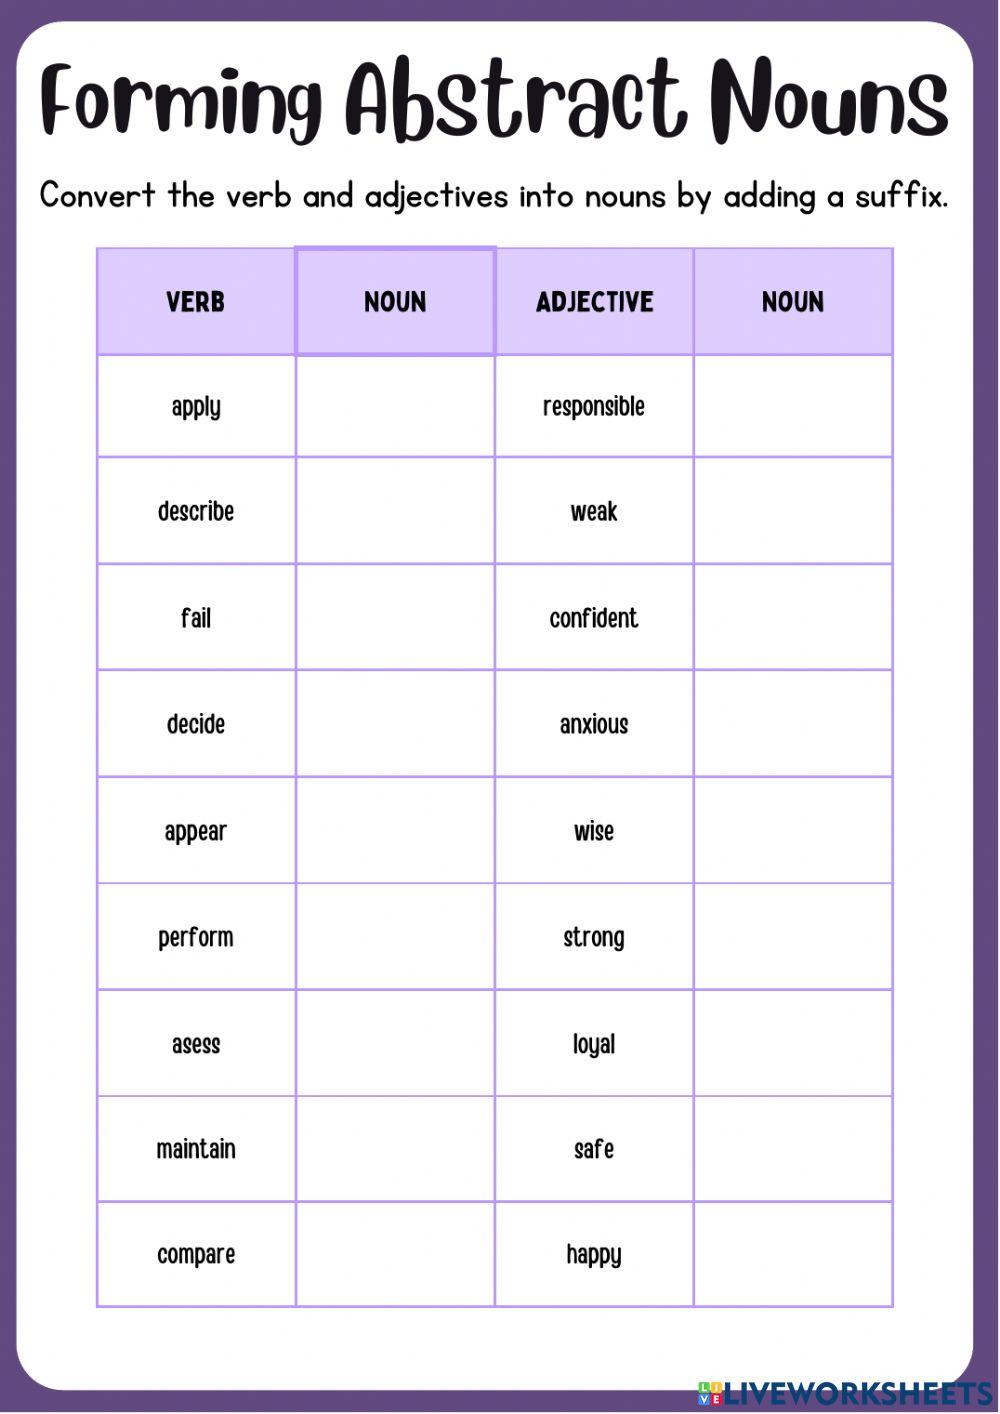 Forming Abstract Nouns